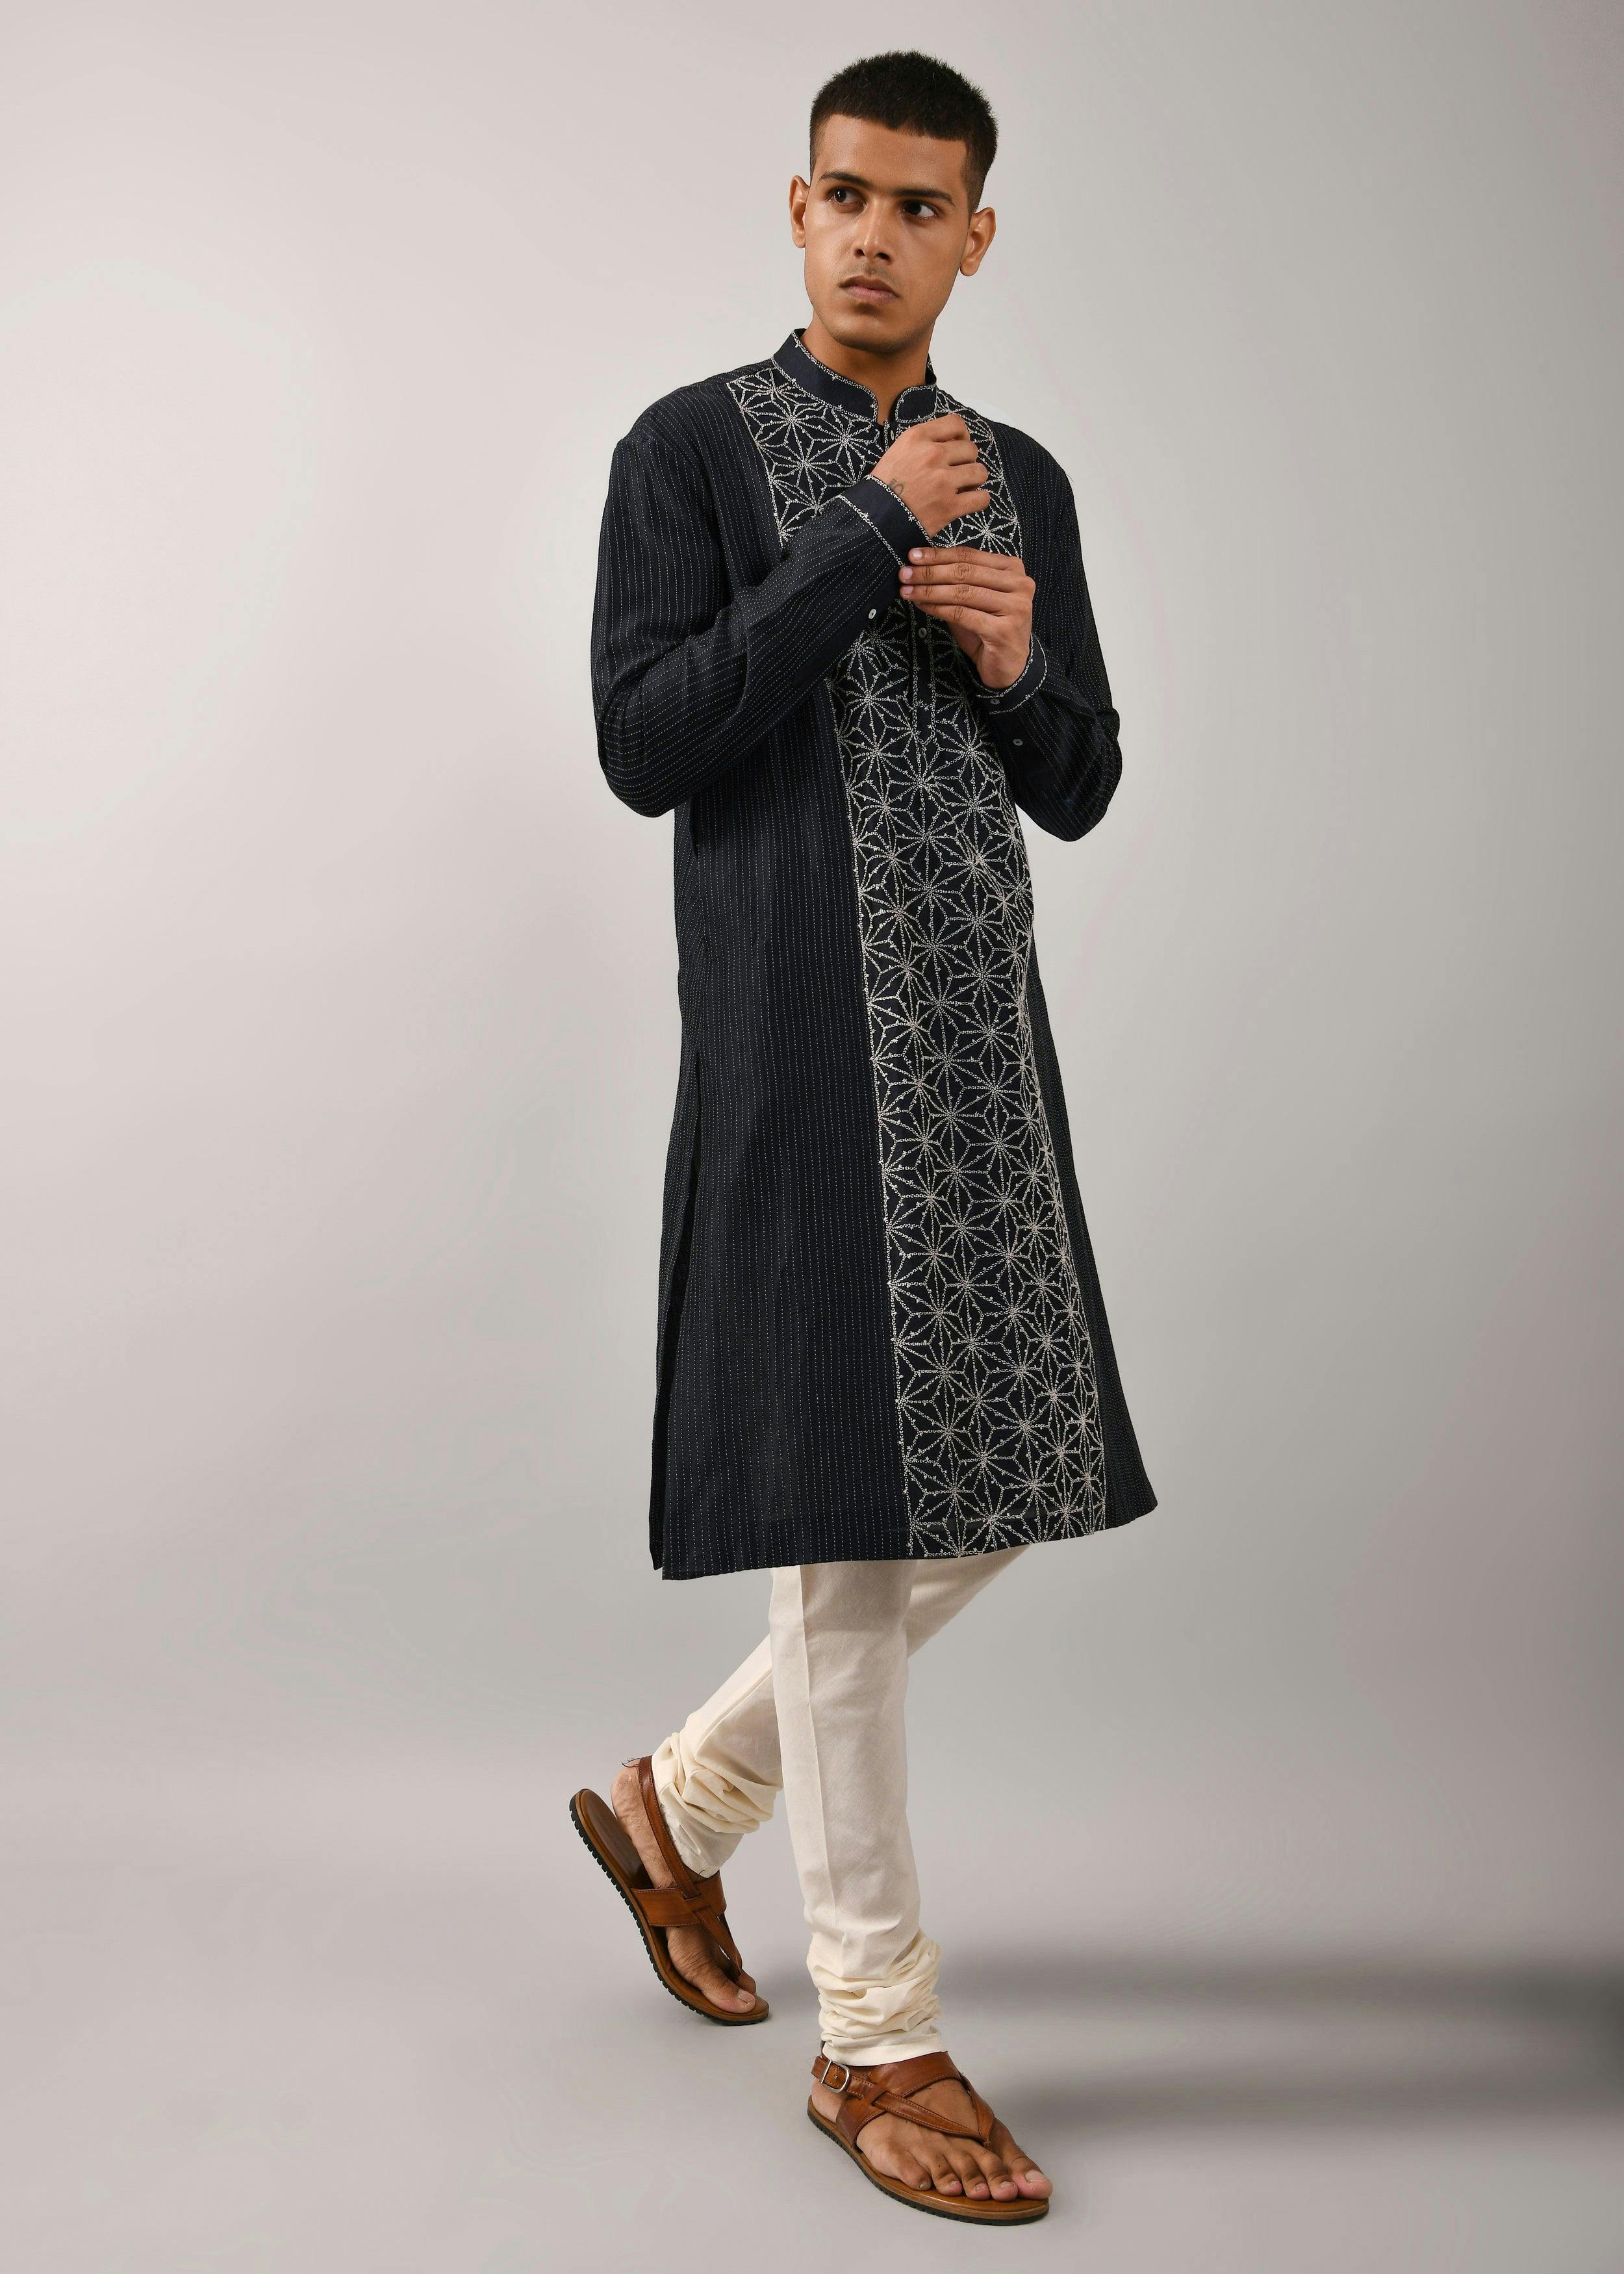 Dhruvtara Embroidered Kurta Set, a product by Country Made